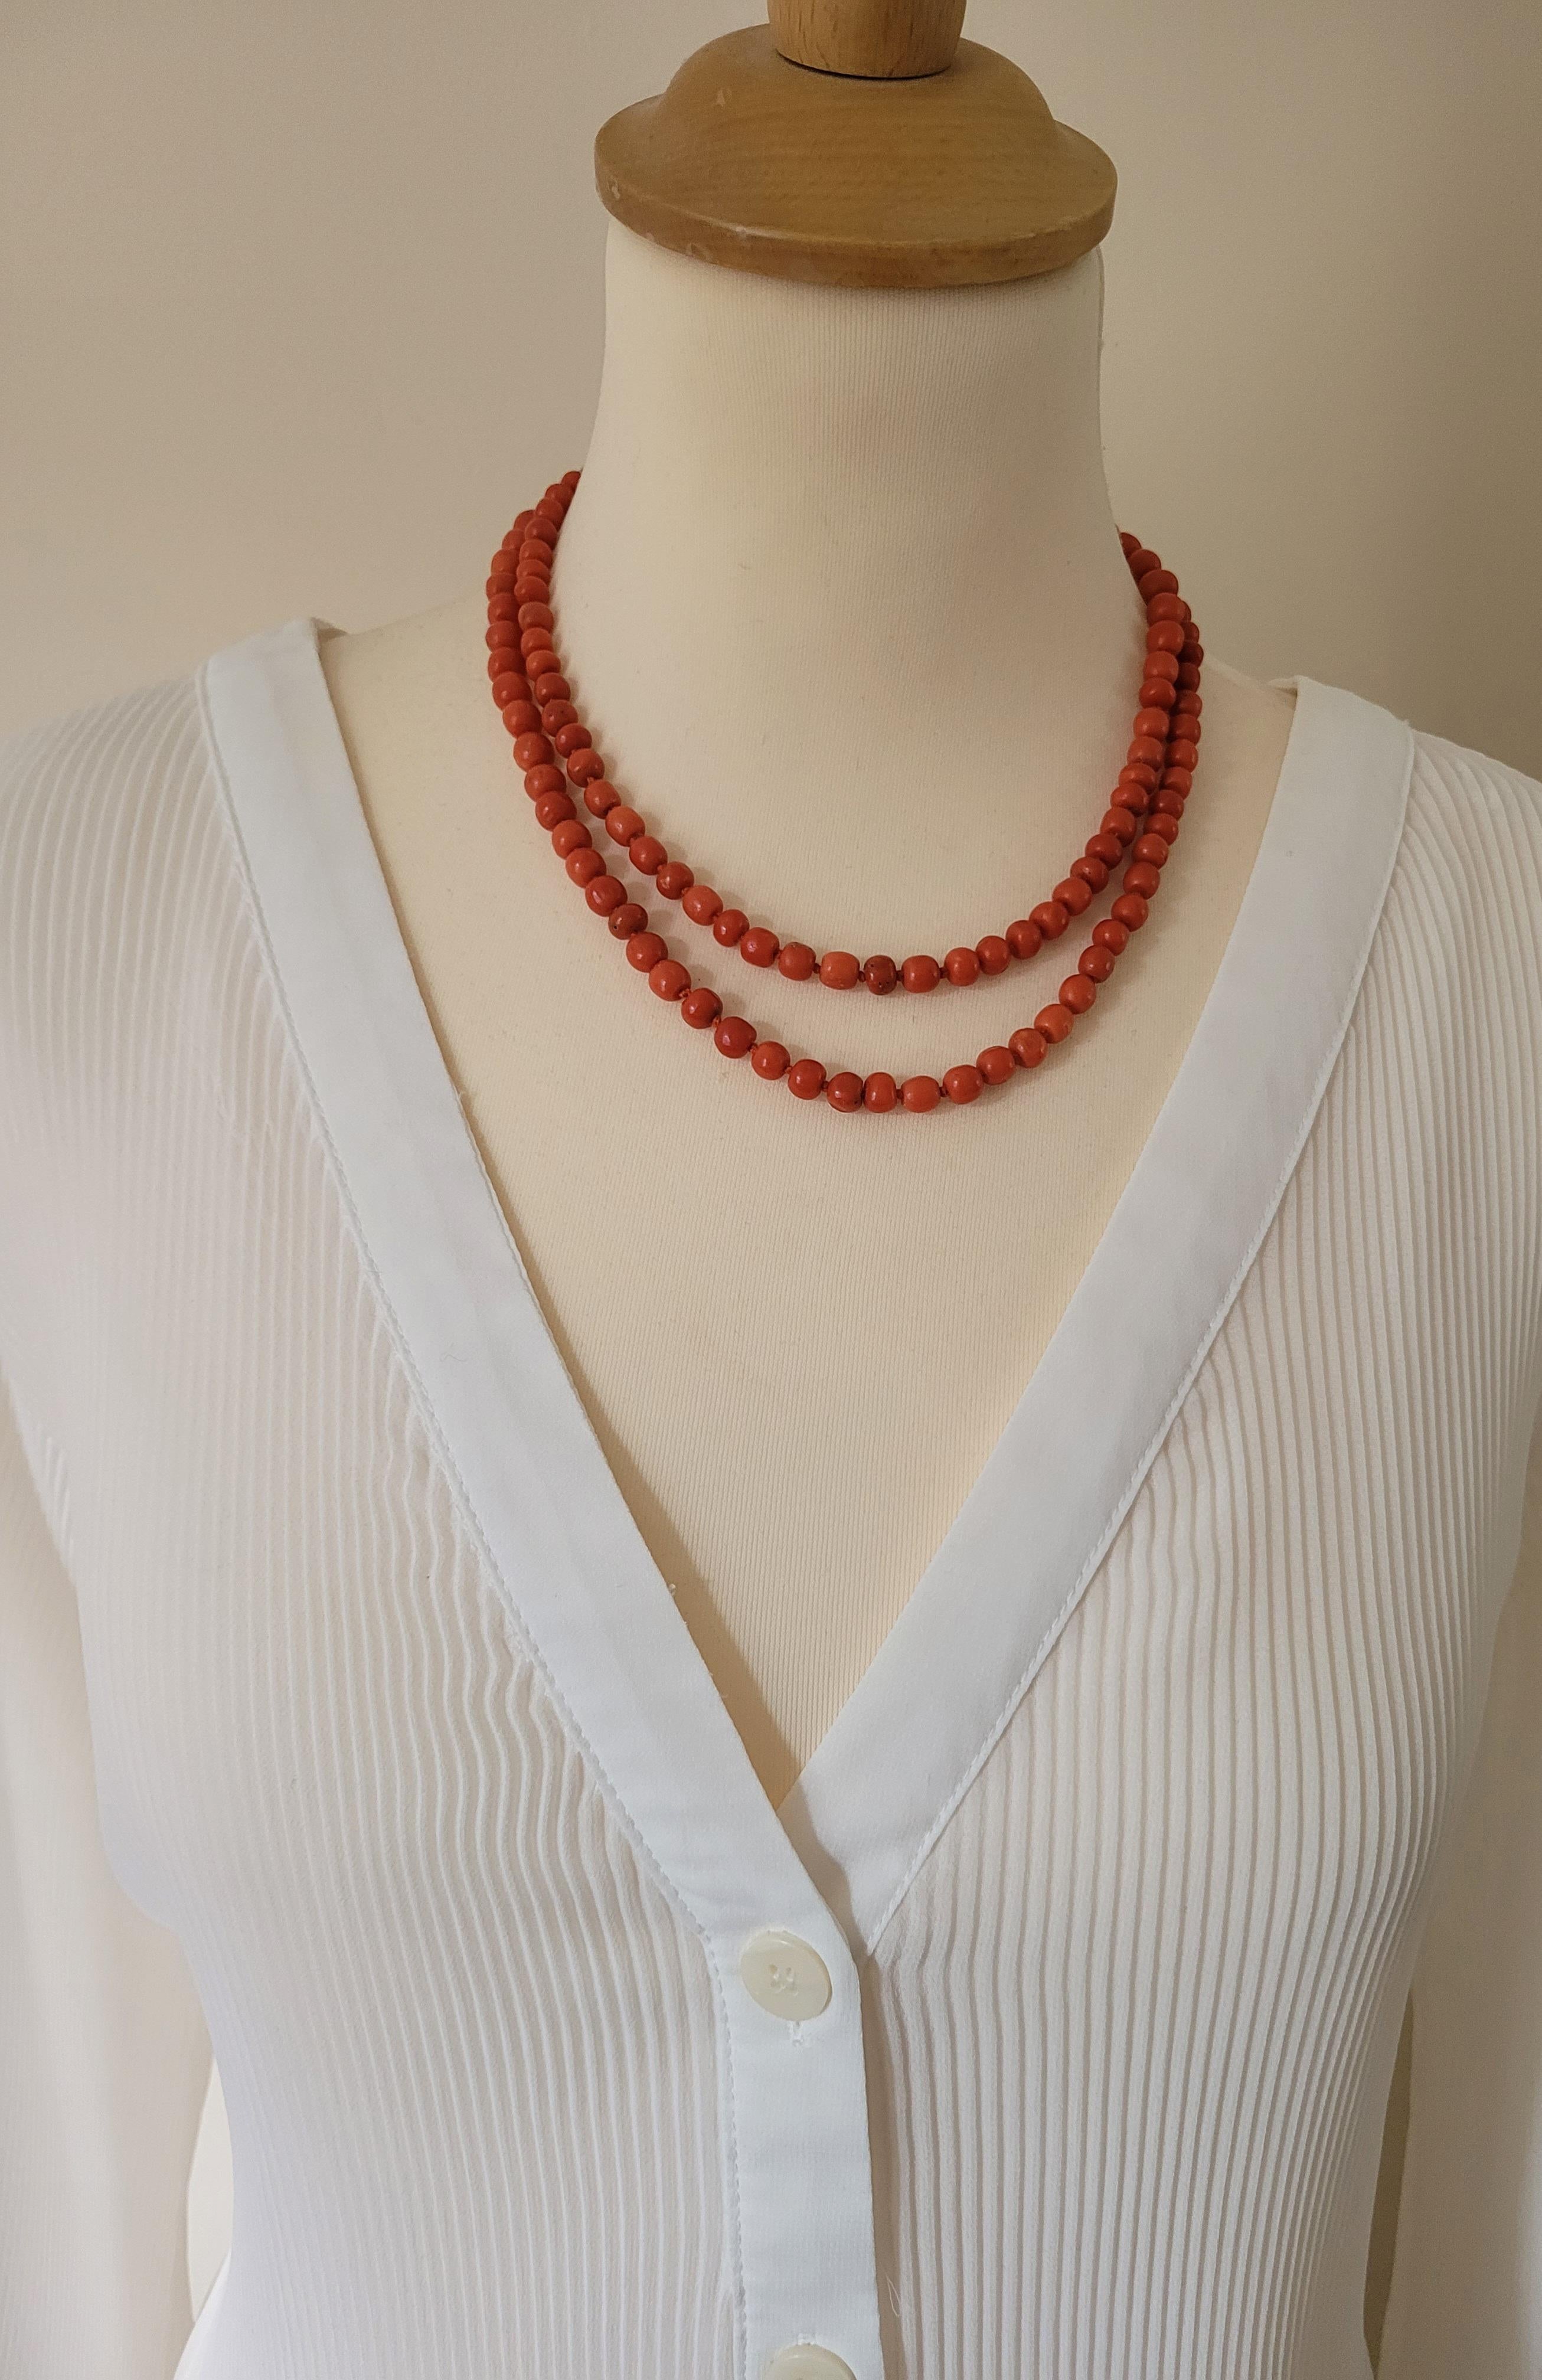 Antique Victorian Red Salmon Coral Opera Beads Necklace In Excellent Condition For Sale In Boston, Lincolnshire